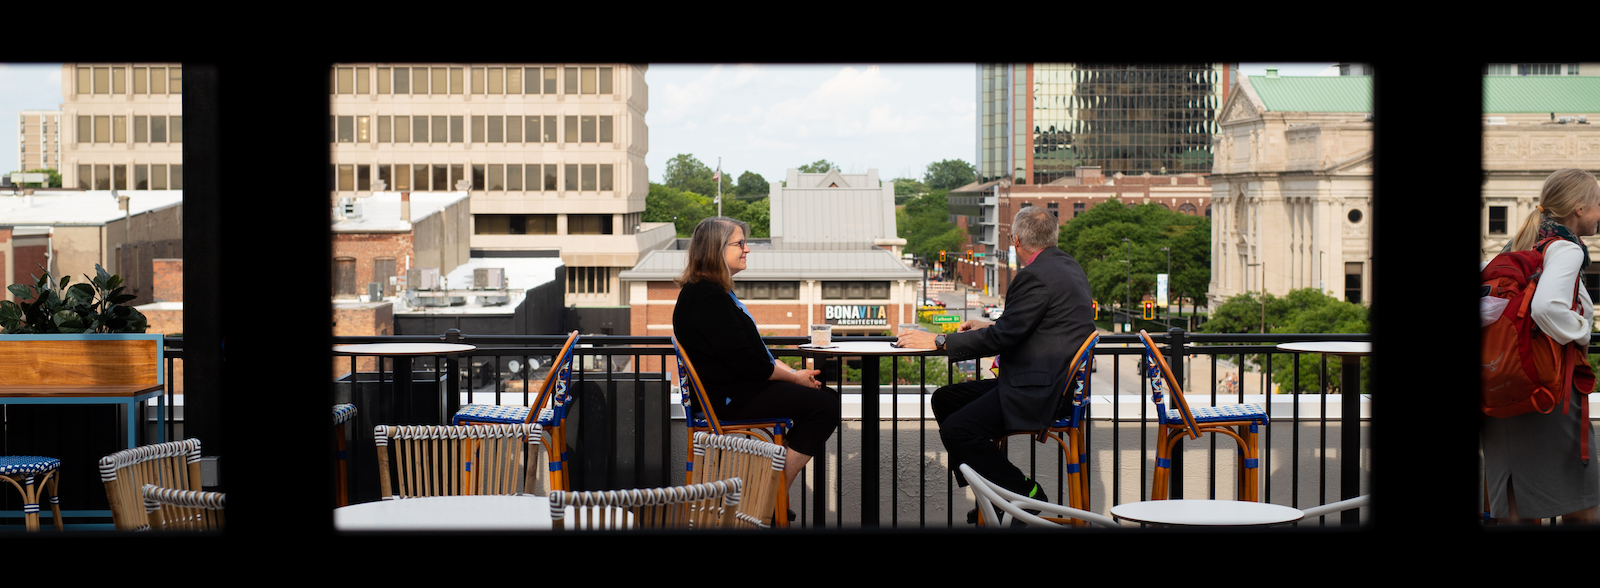 Birdie's Rooftop Bar is perched atop Fort Wayne's new boutique hotel The Bradley at 204 W. Main St.